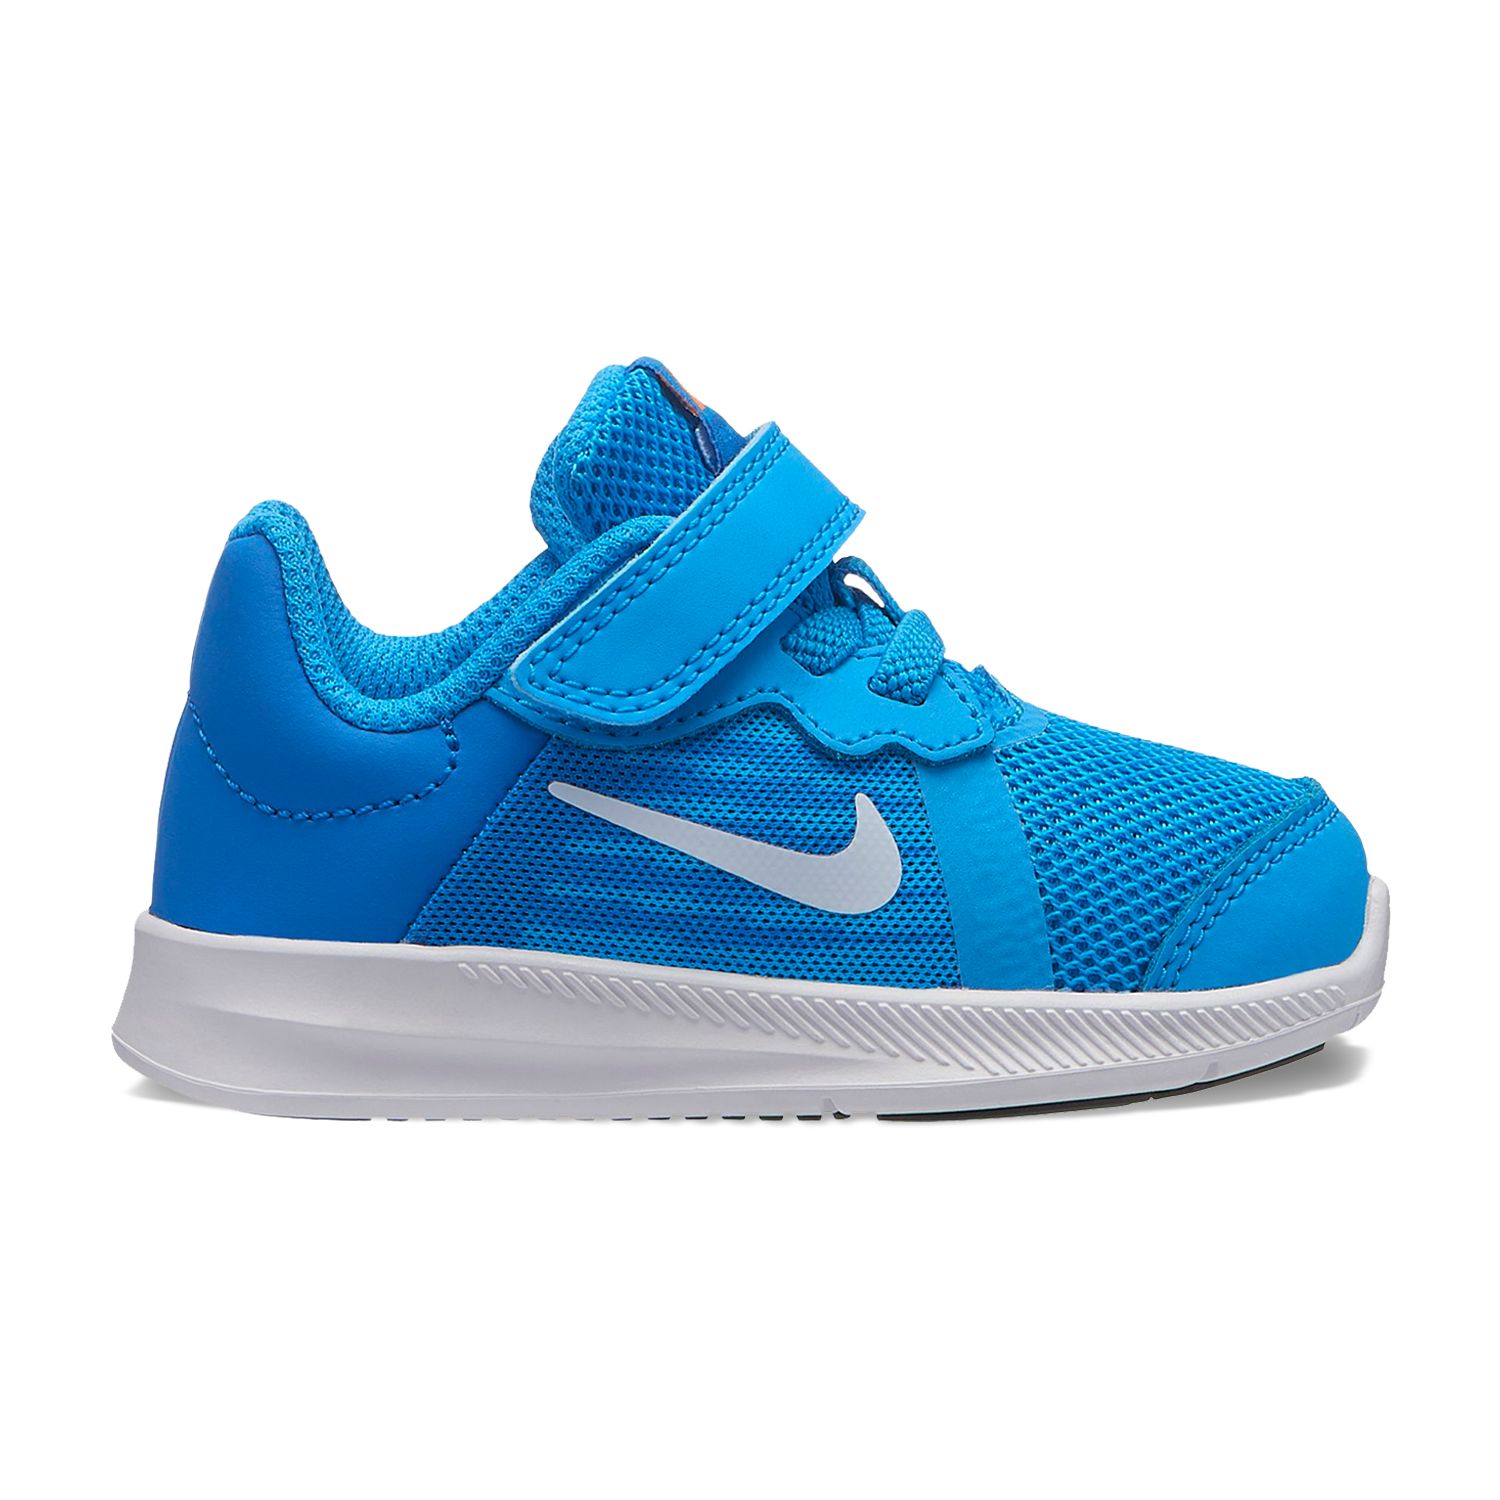 Nike Downshifter 8 Toddler Boys' Sneakers